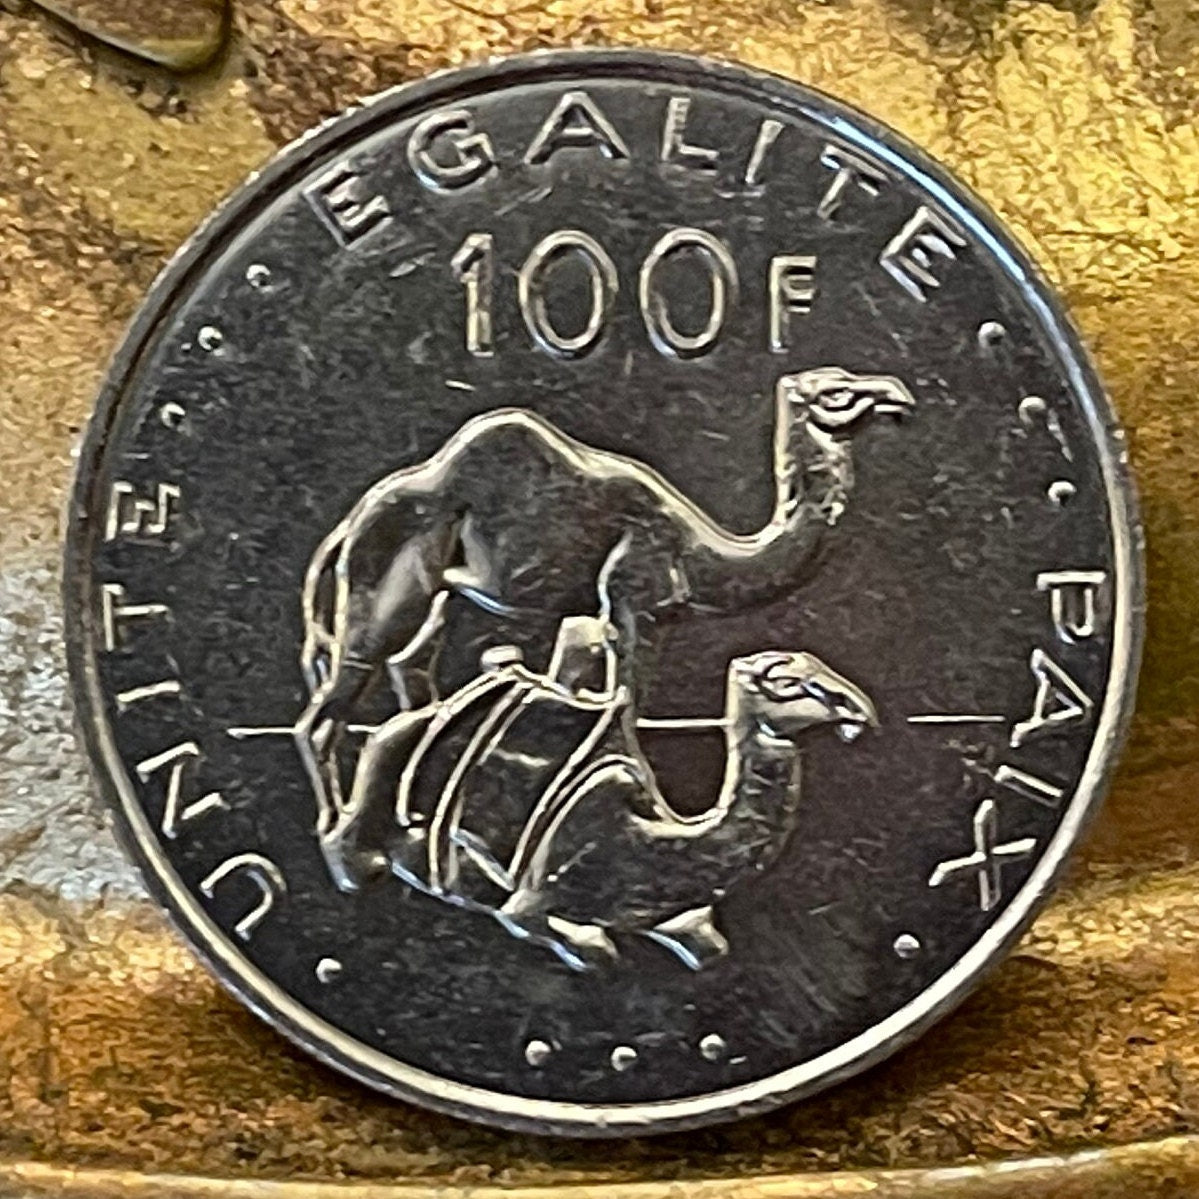 Dromedary Camels & Jile Daggers of Afar and Issa Tribes Djibouti 100 Francs Authentic Coin Money for Jewelry (Unity Equality Peace)